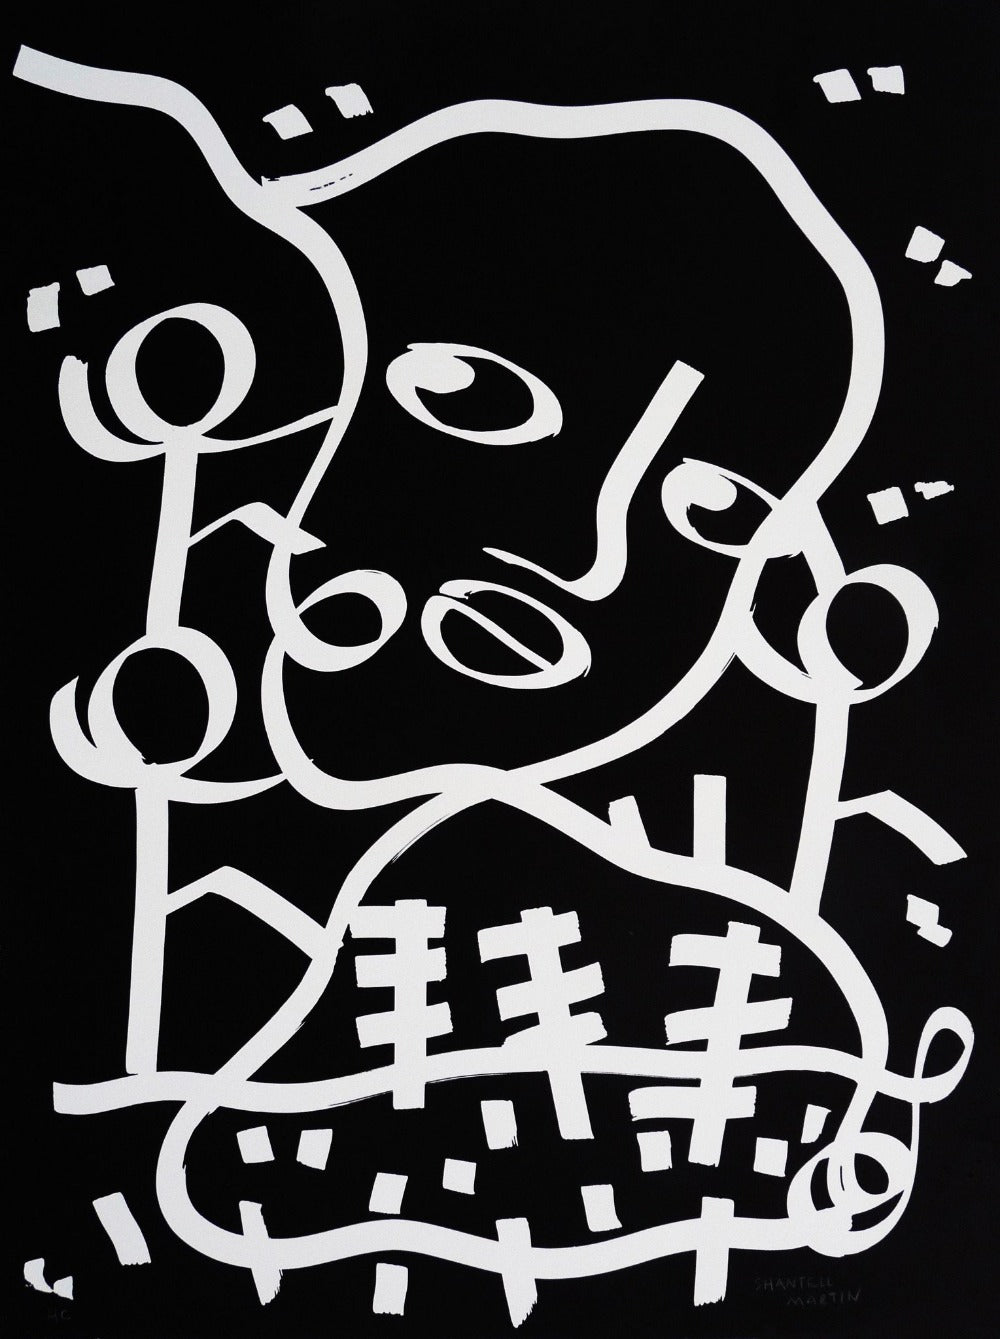 One-Signed Lithograph-Lithograph-Shantell Martin Shop